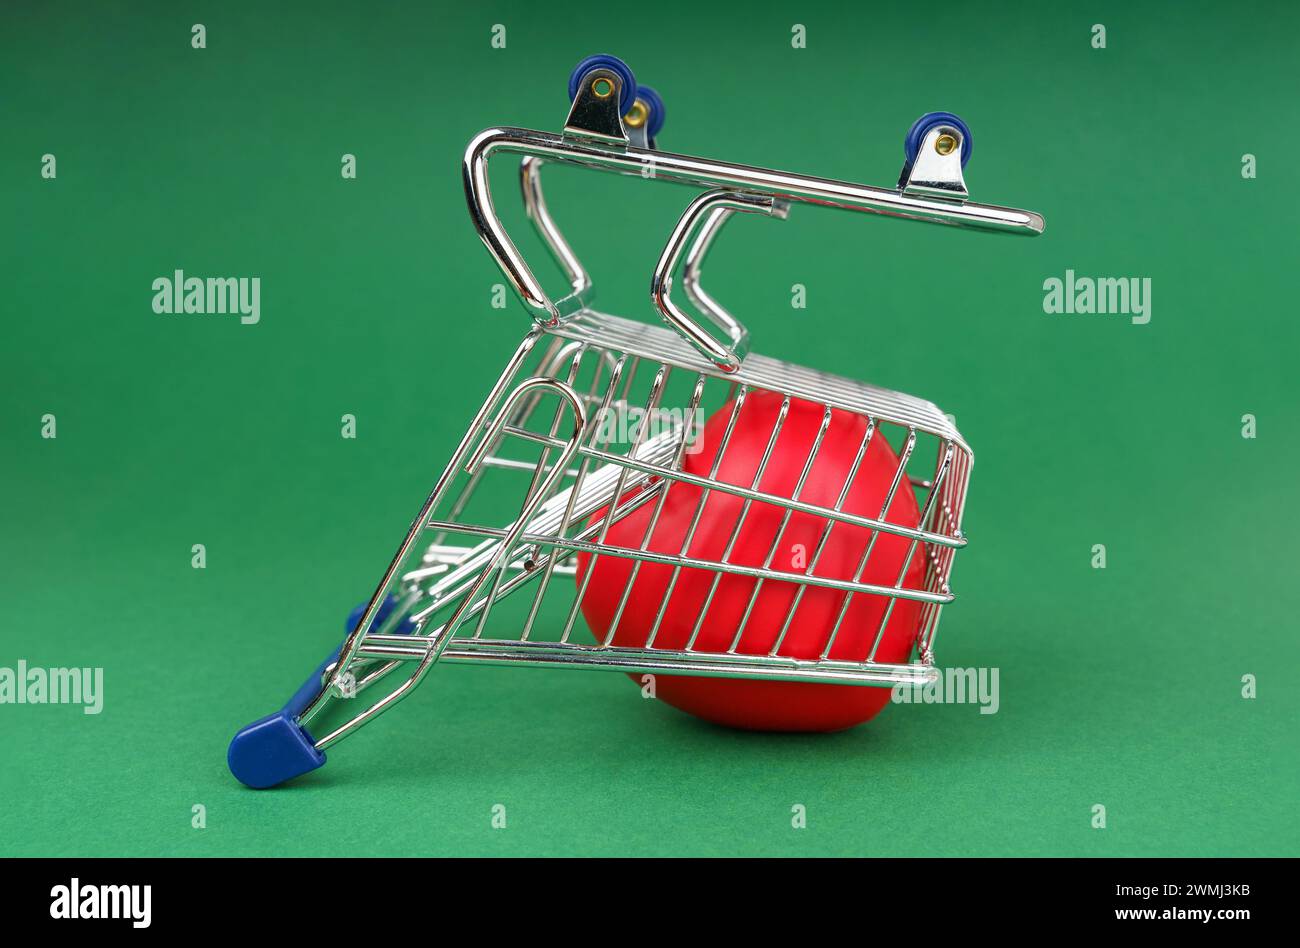 On a solid green background sits a small metal shopping cart with blue handles containing a red heart. The cart stands upside down, simulating disappo Stock Photo